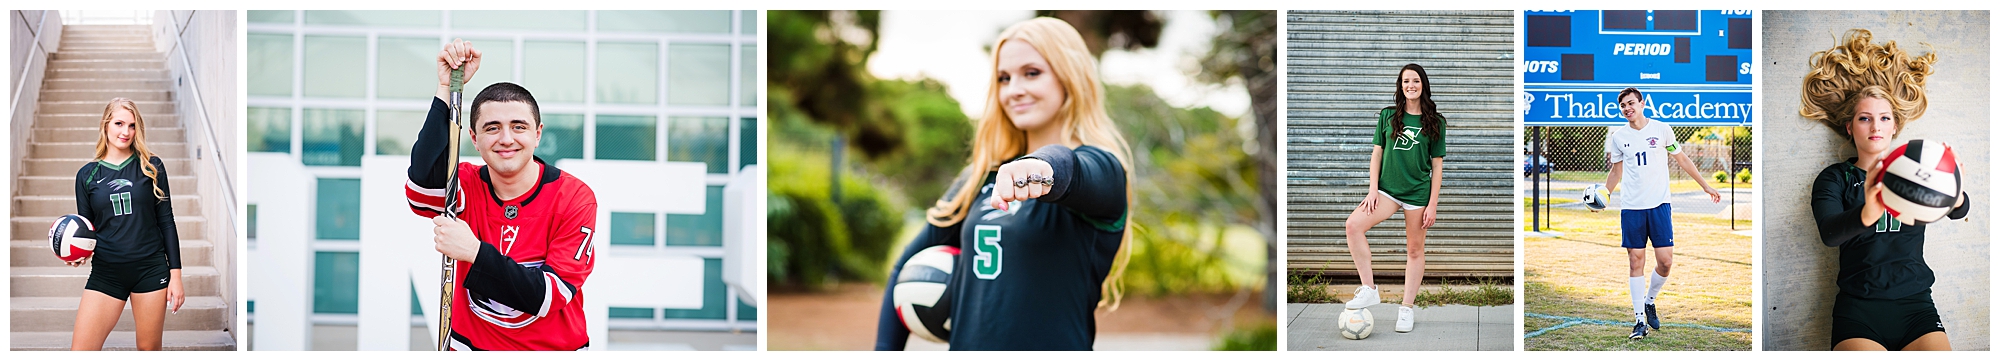 Sports Uniforms for senior pictures